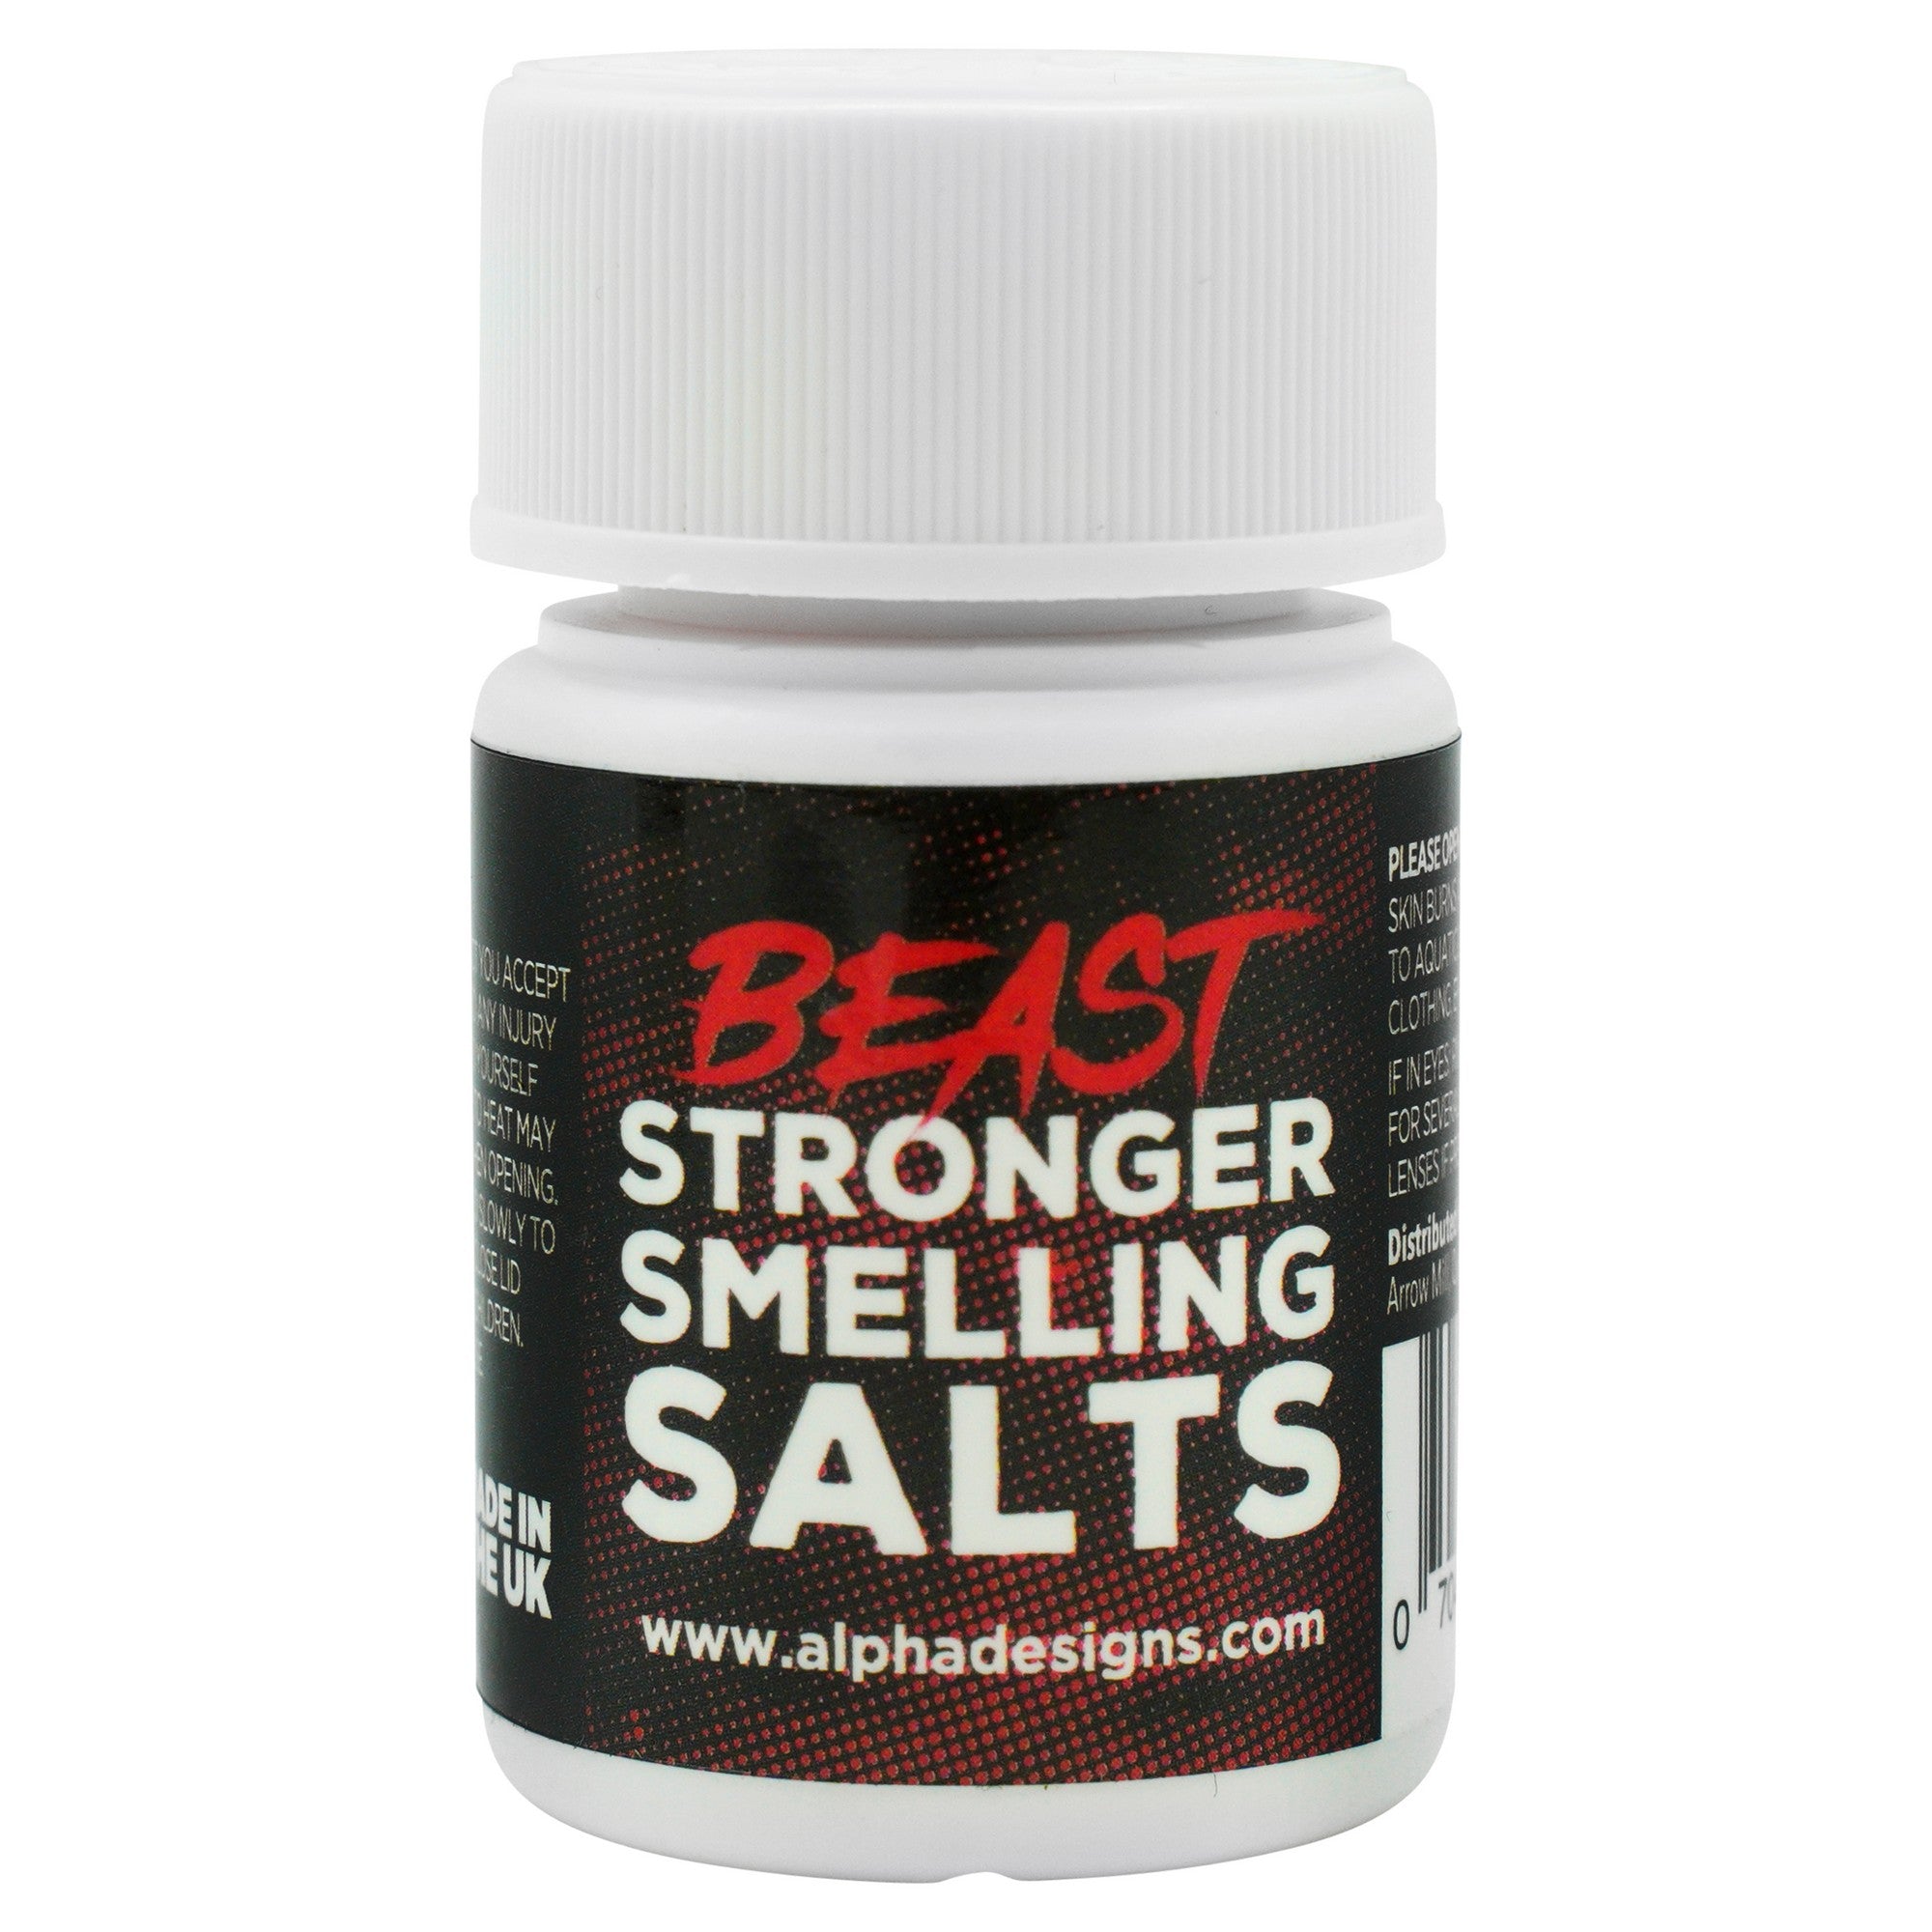 Alpha Designs BEAST Smelling Salts - 50-140 Characters